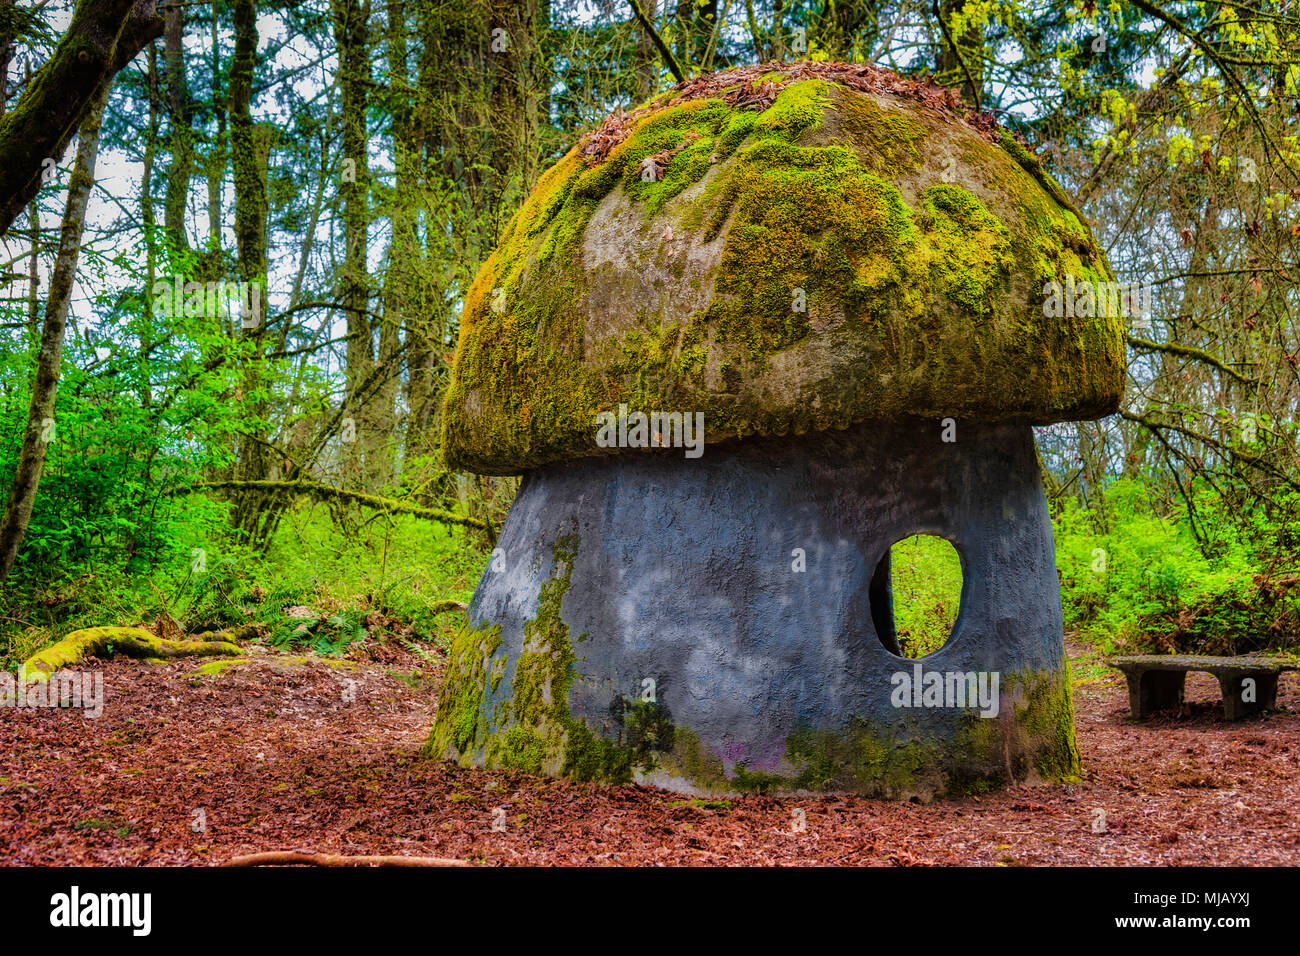 McMinnville, Oregon, USA - April 4, 2018:  Mushroom house in a nearly abandoned city park in McMinnville, Oregon Stock Photo